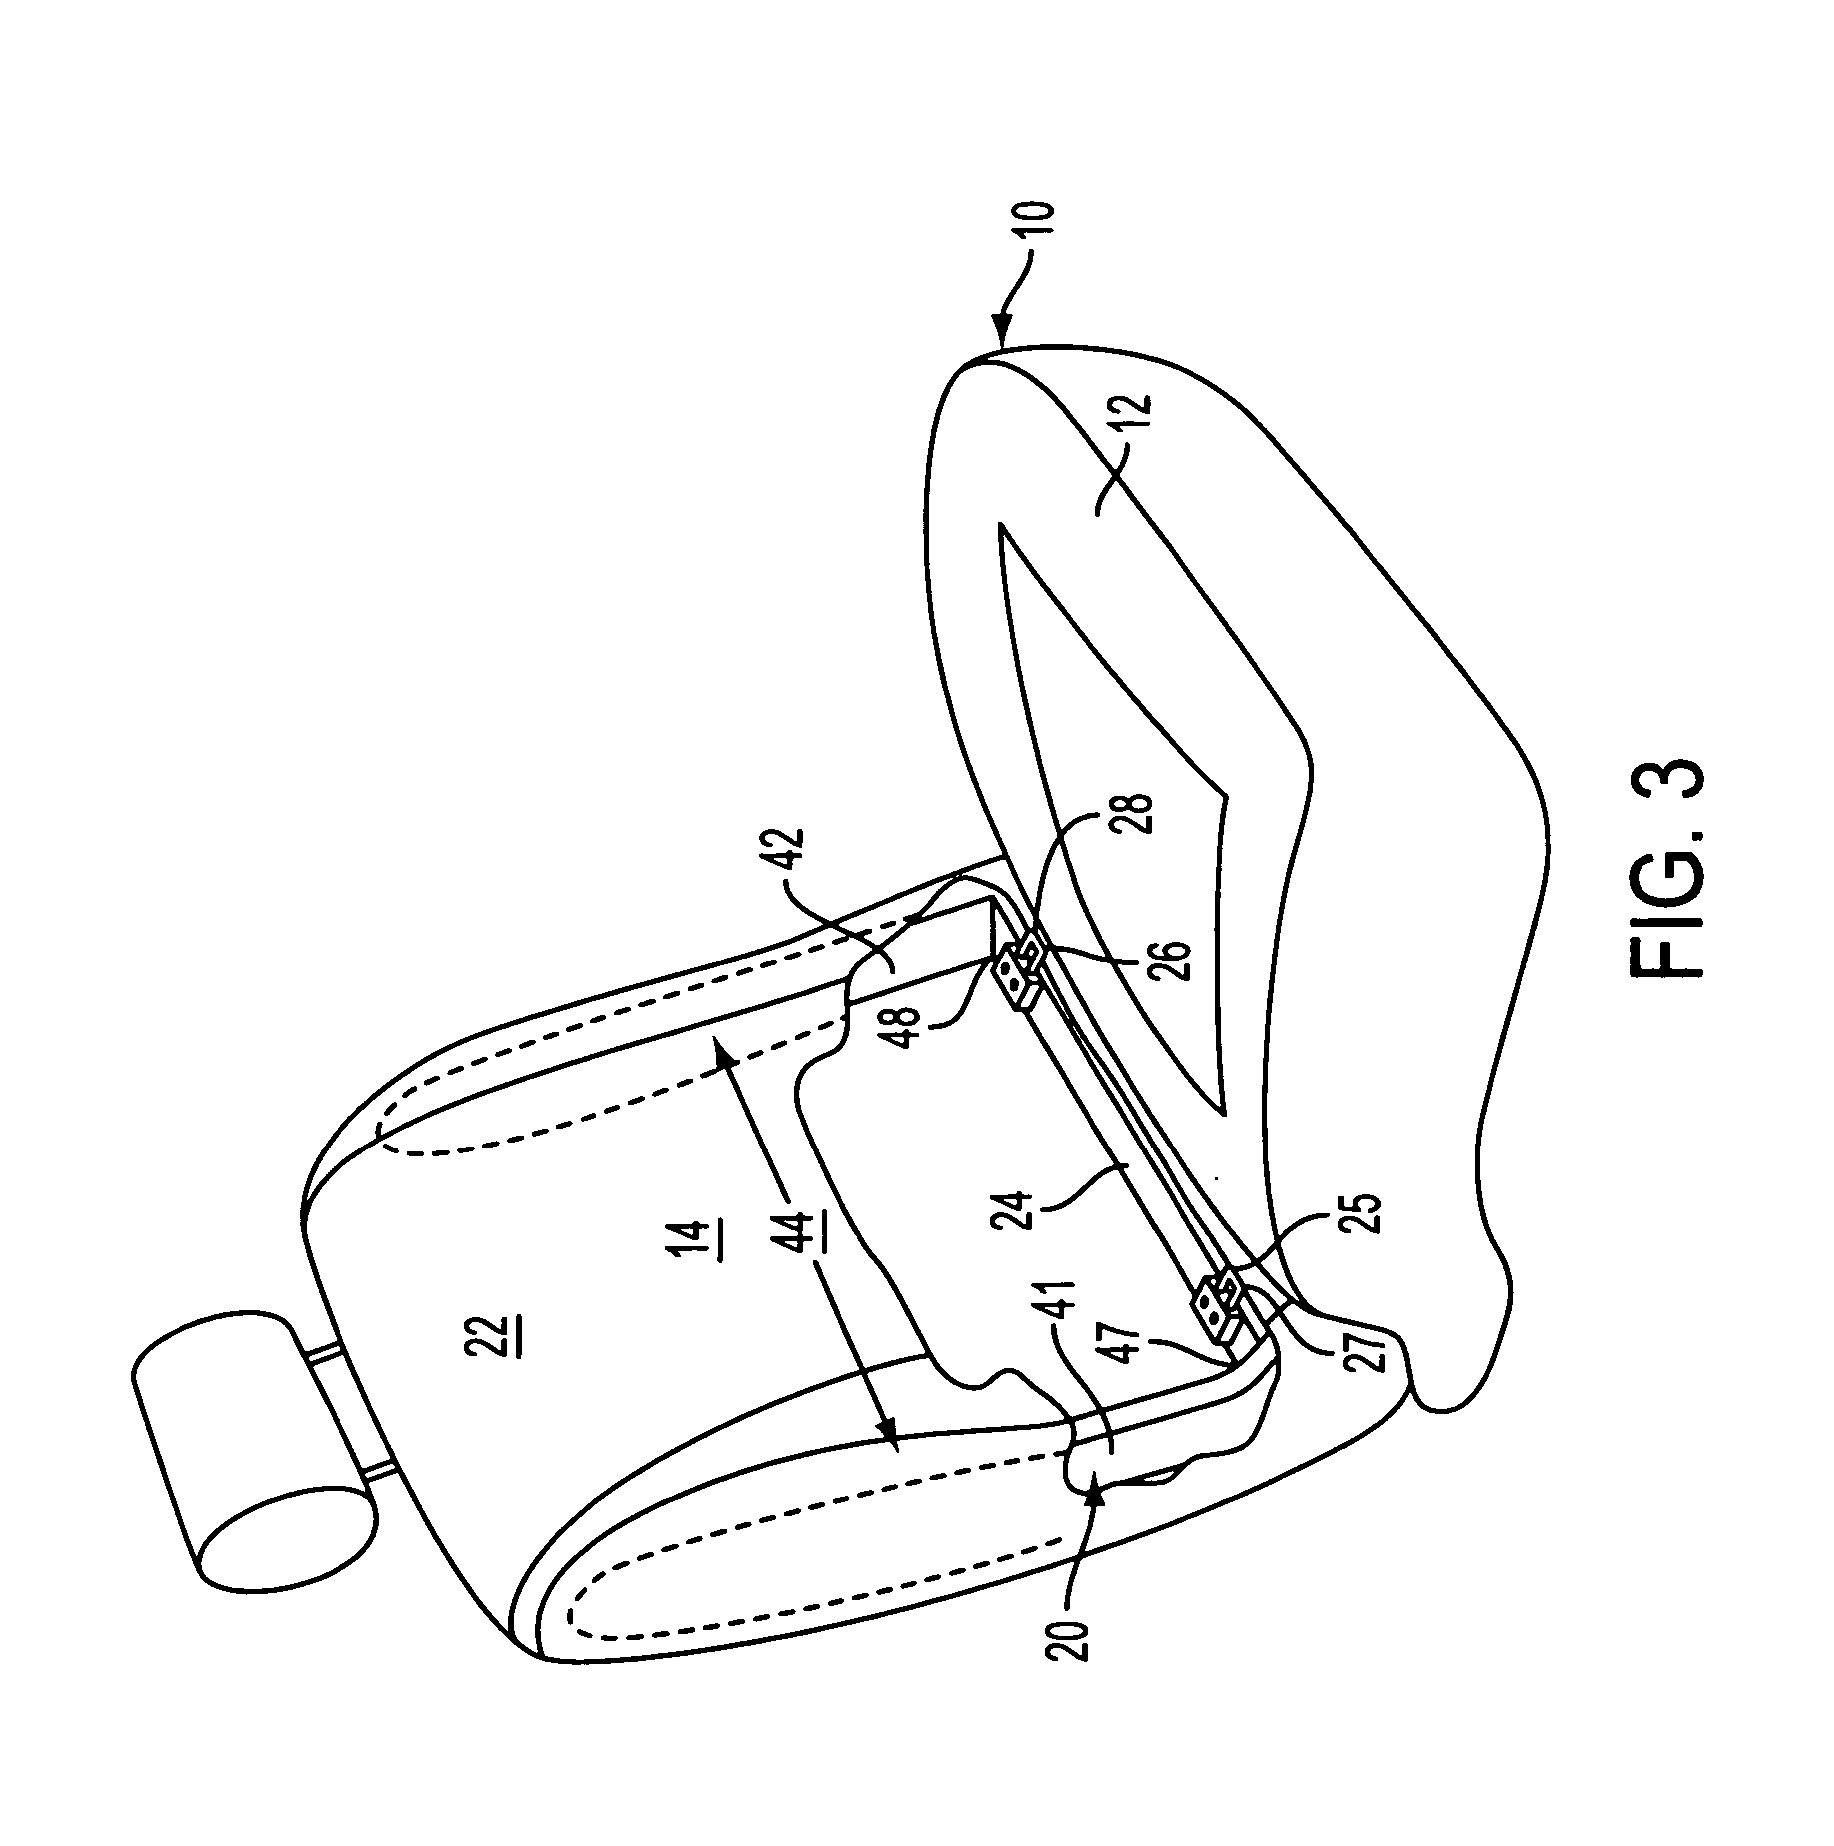 Child restraint seat anchors with integrated child seat detectors